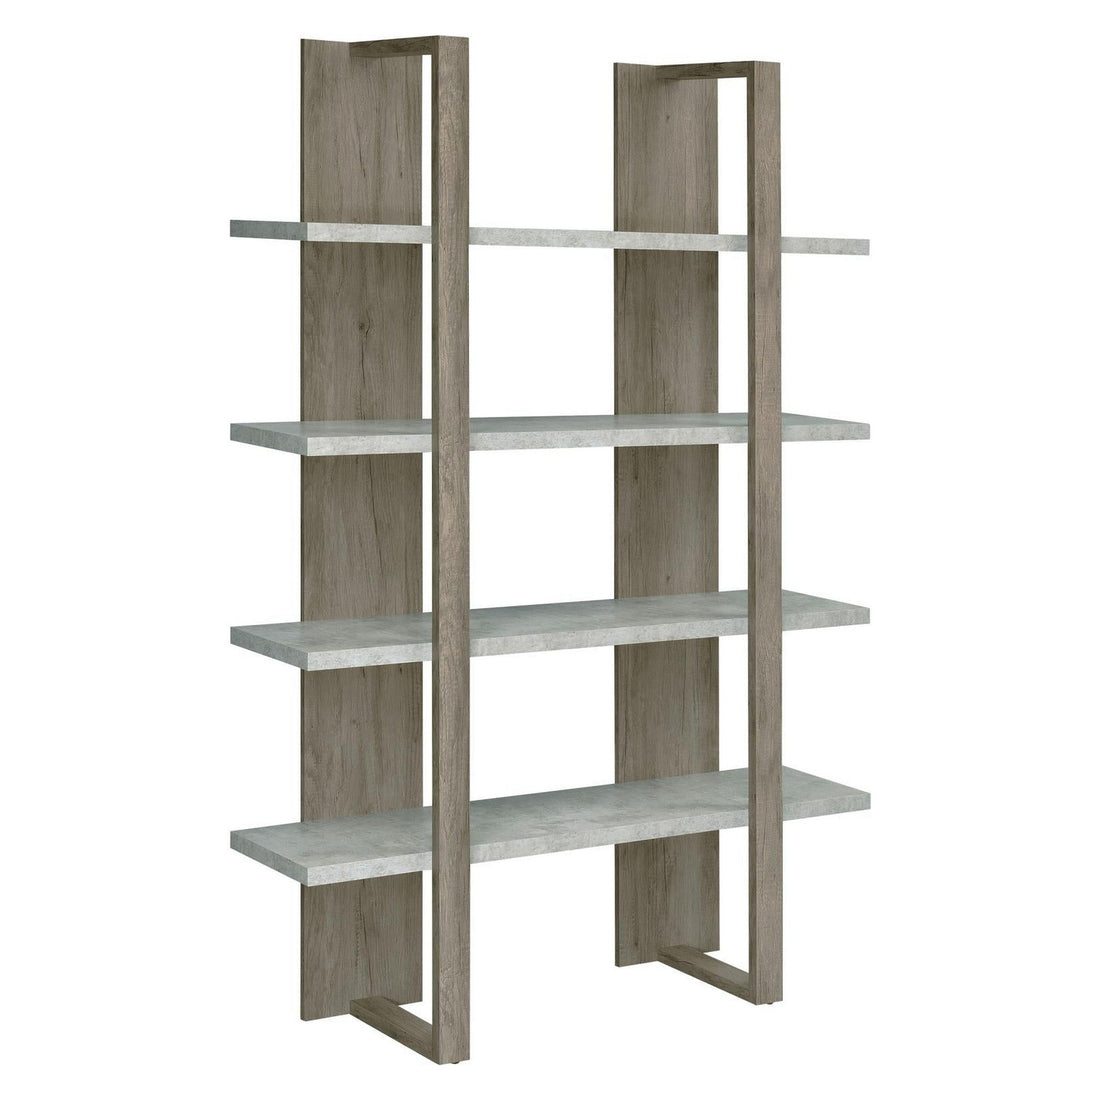 Danbrook Bookcase with 4 Full-length Shelves 882037